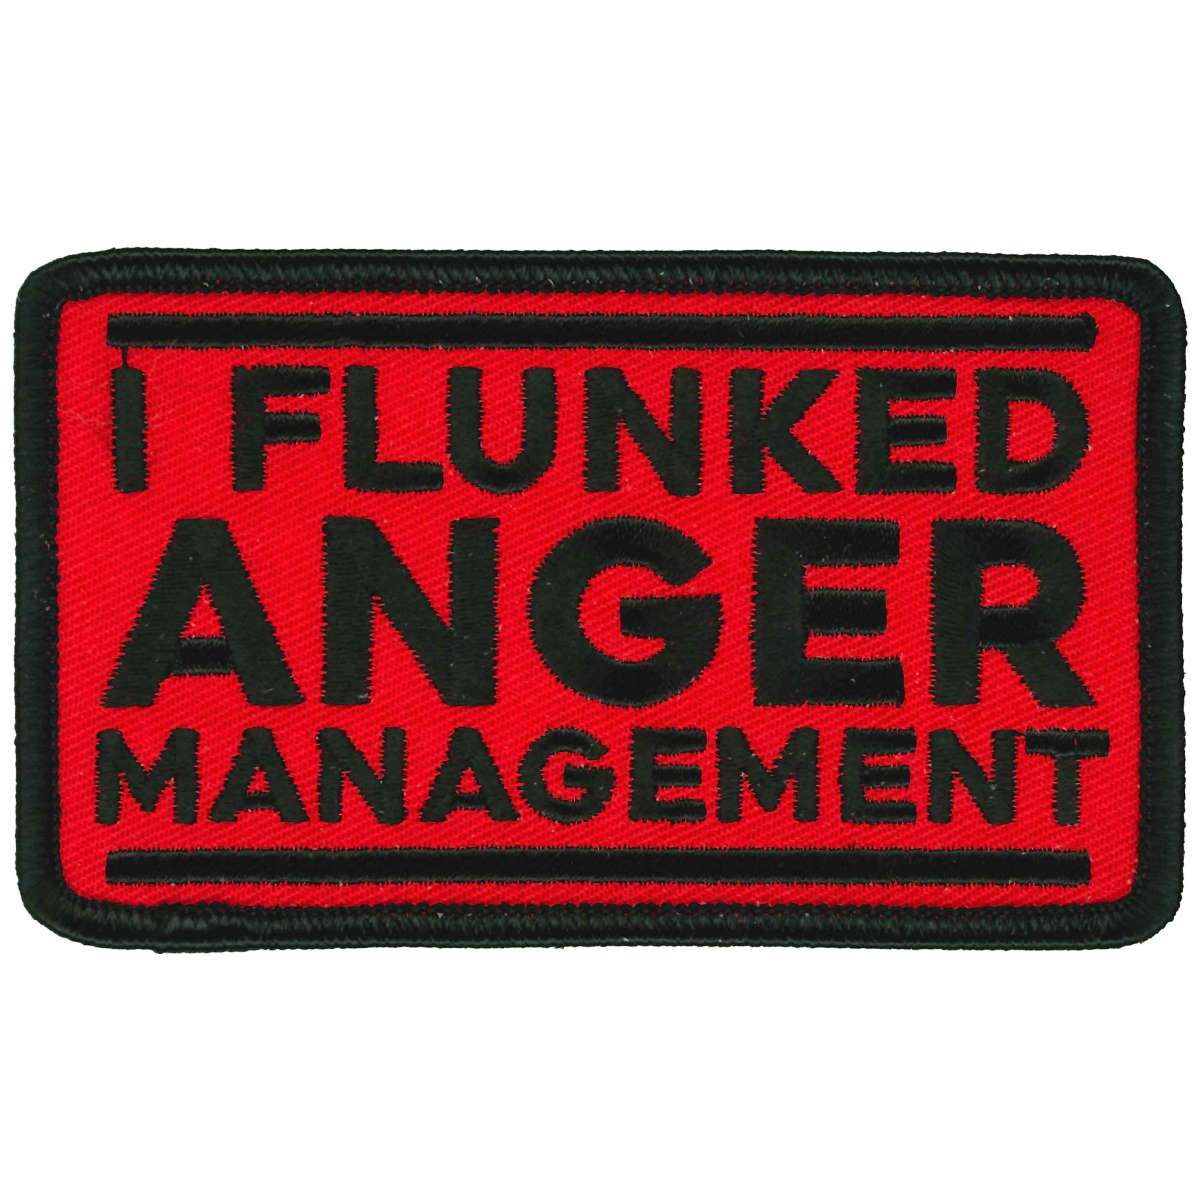 Hot Leathers Anger Management Patch PPL9944